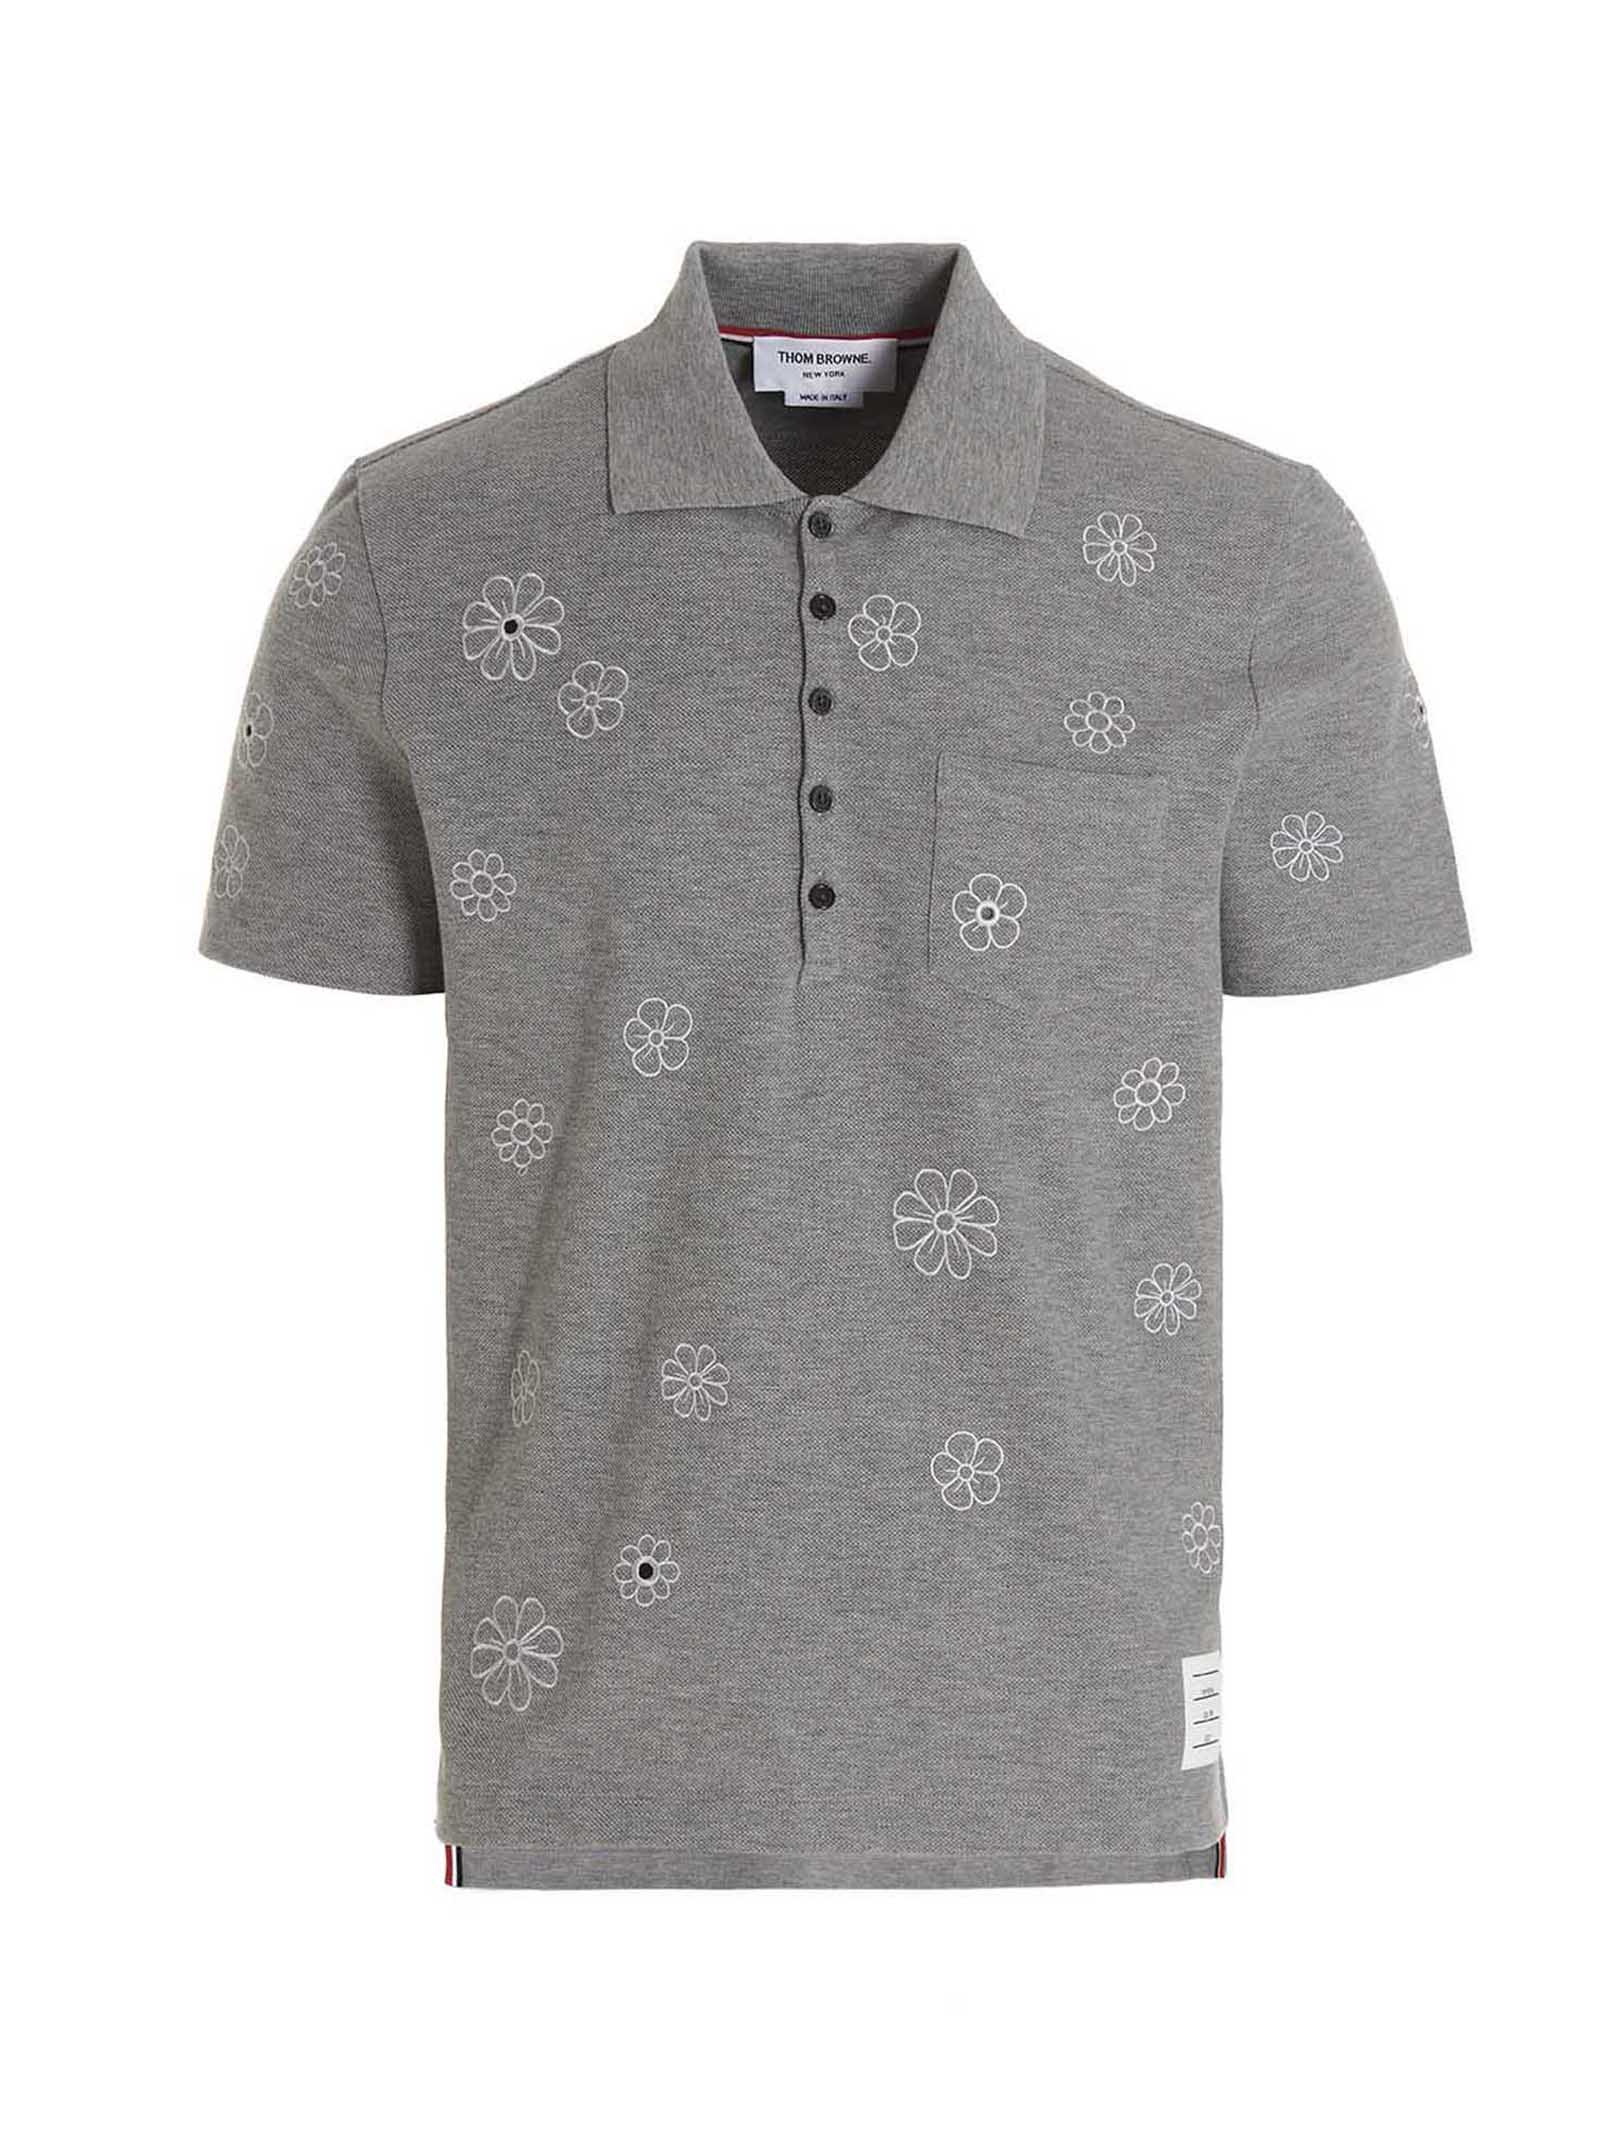 Thom Browne Floral Embroidery Polo Shirt